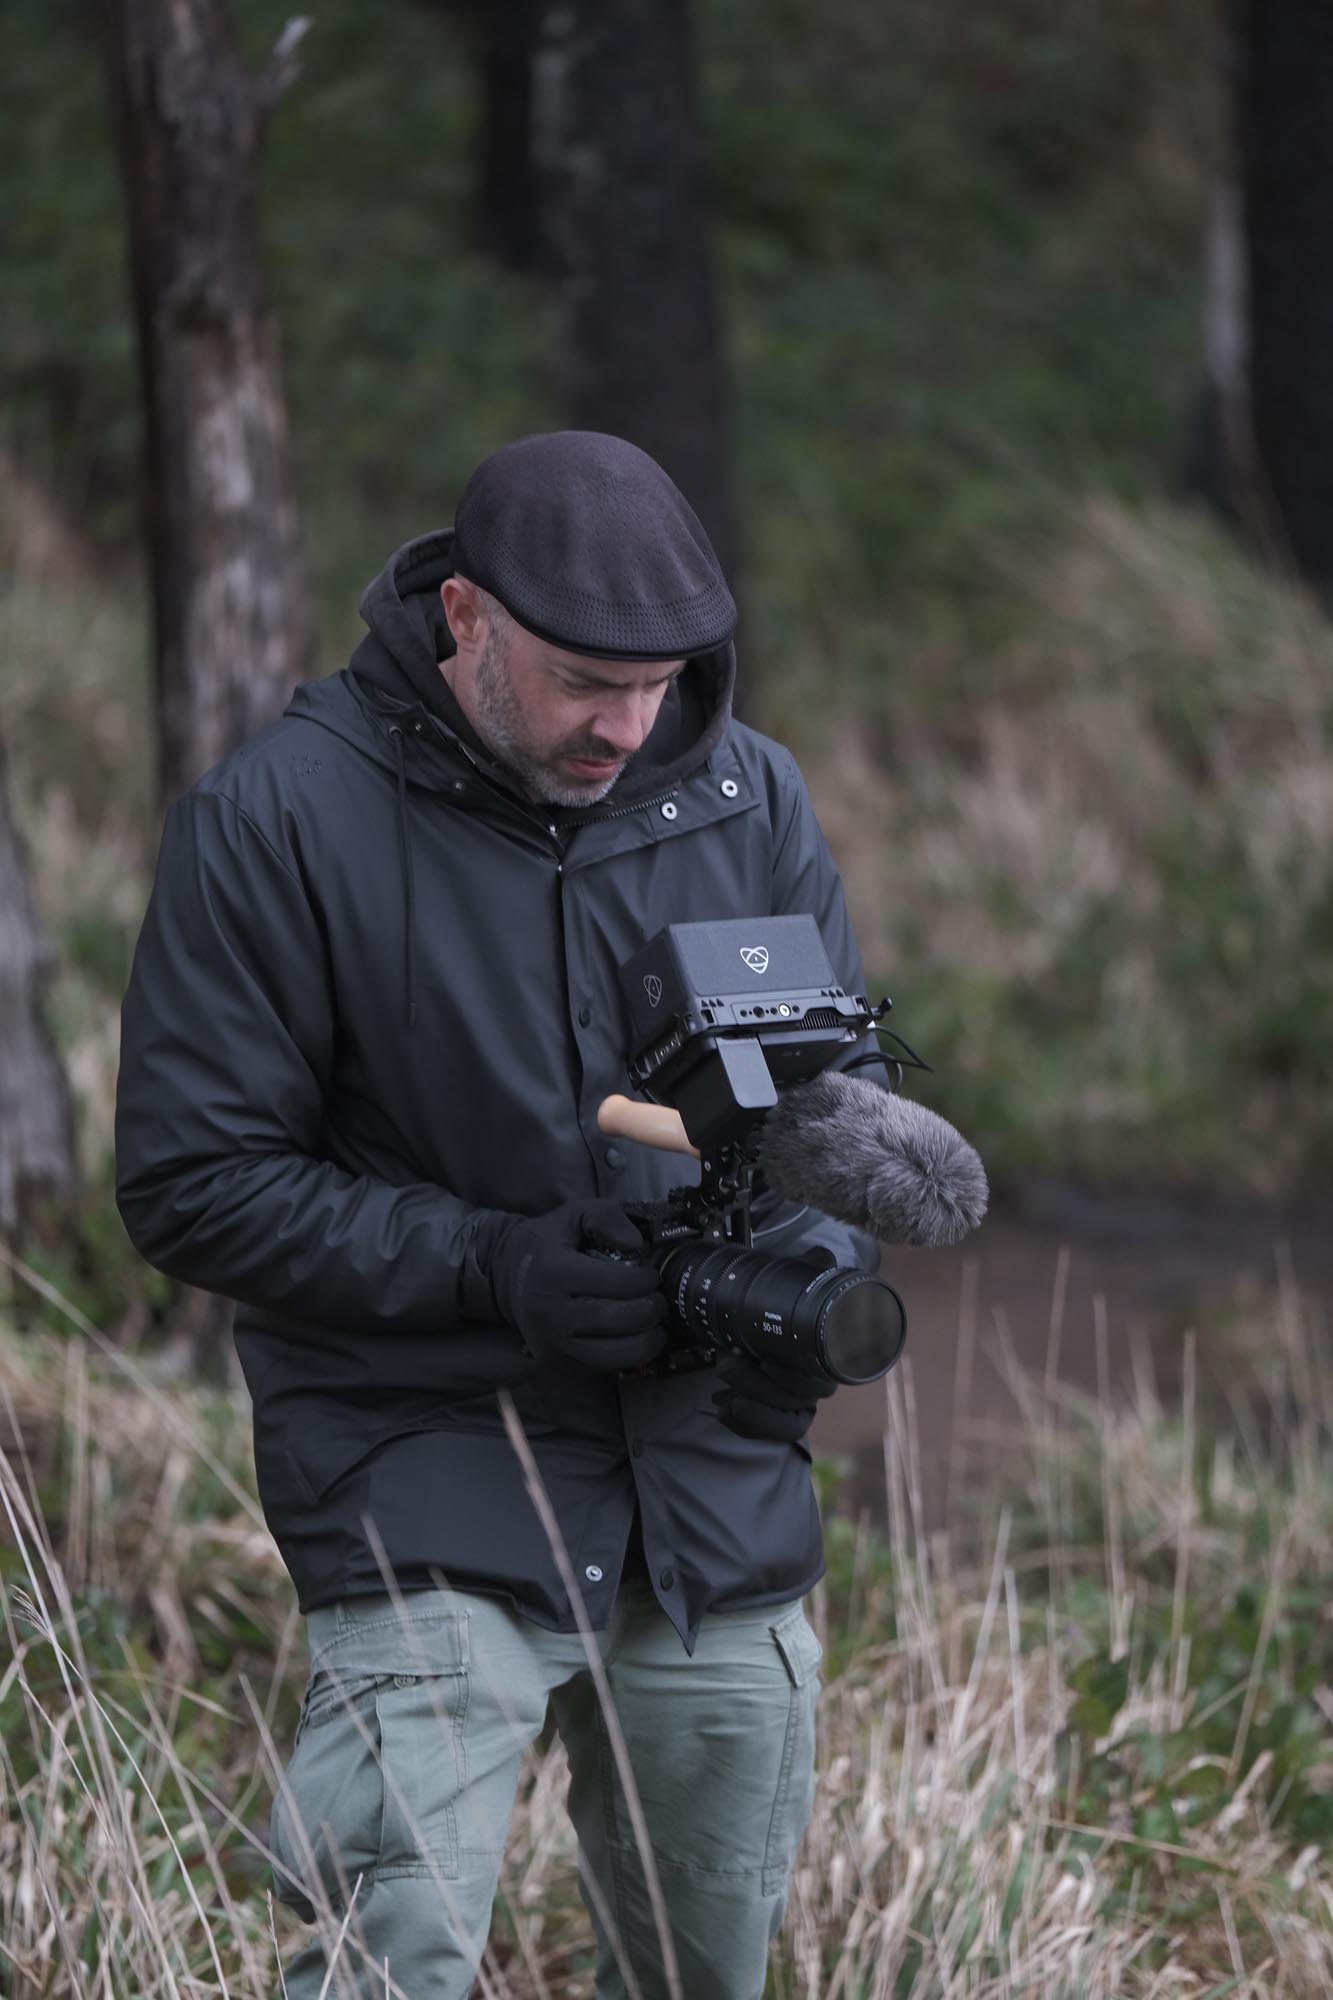 A man in a raincoat aims his camera at something out of frame